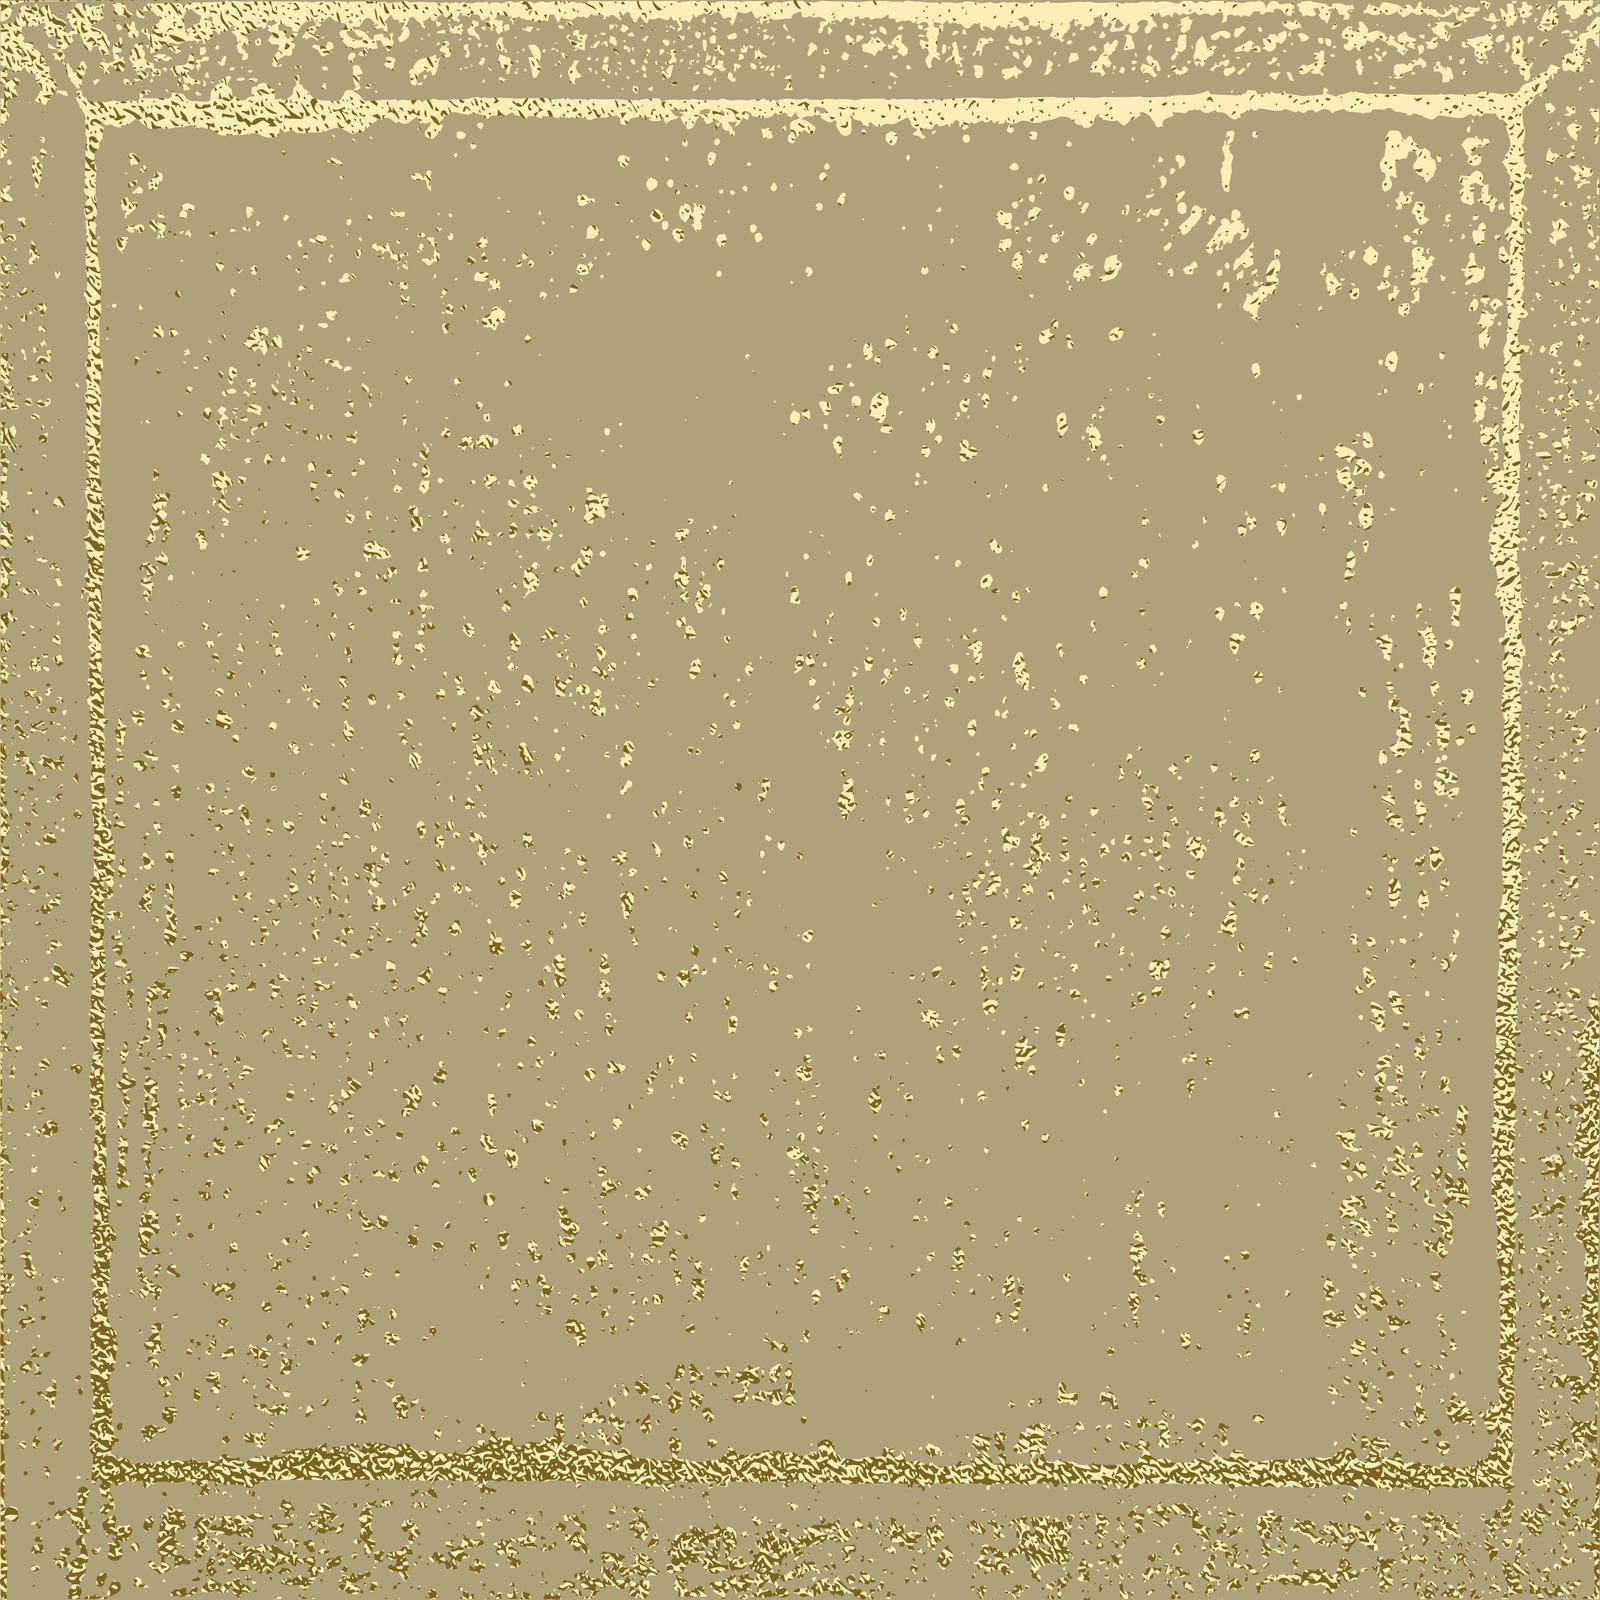 Gold texture. Abstract gold background. Distress, dirt texture . Simply place pattern over any object to create distressed effect. Vector illustration. Grunge background. Pattern with cracks.